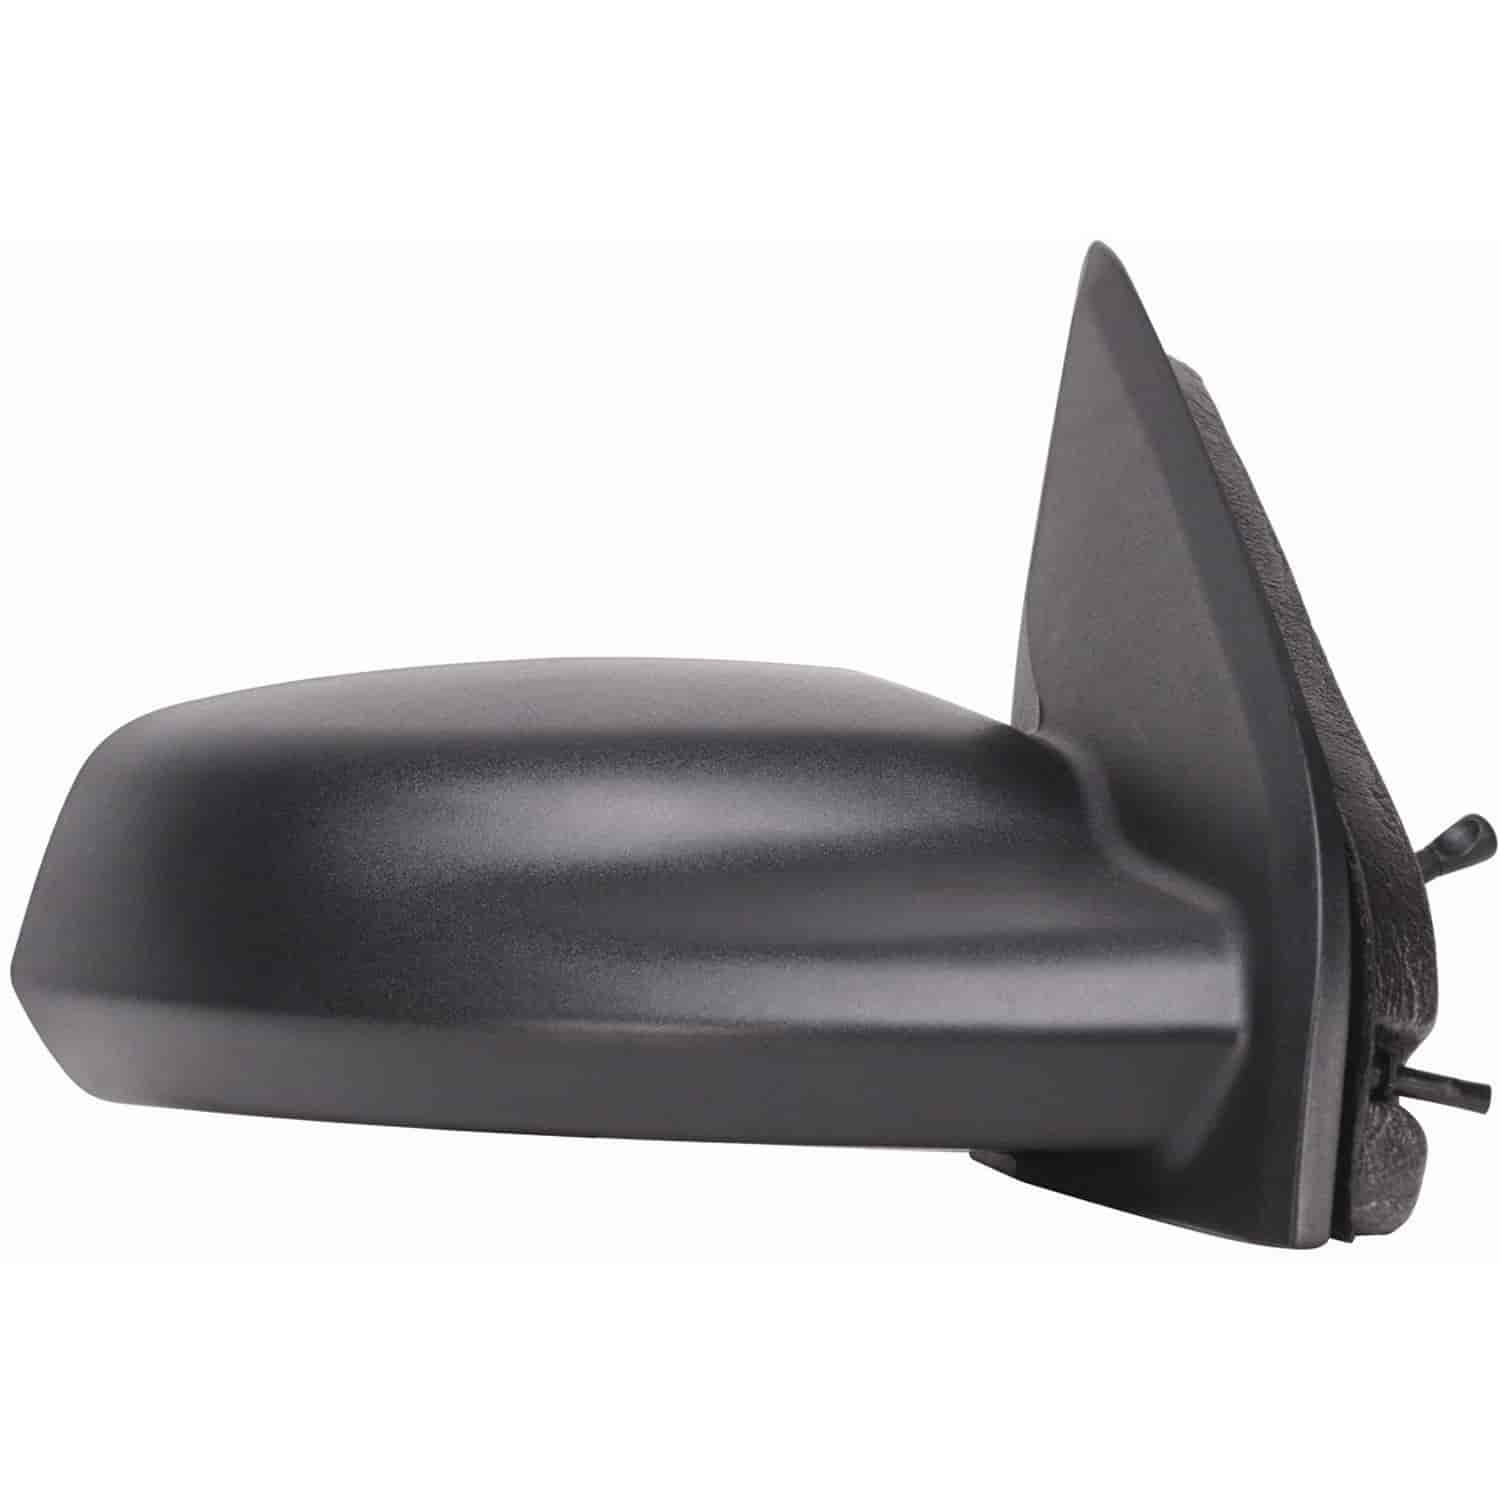 OEM Style Replacement mirror for 03-07 Saturn Ion 3 Sedan passenger side mirror tested to fit and fu